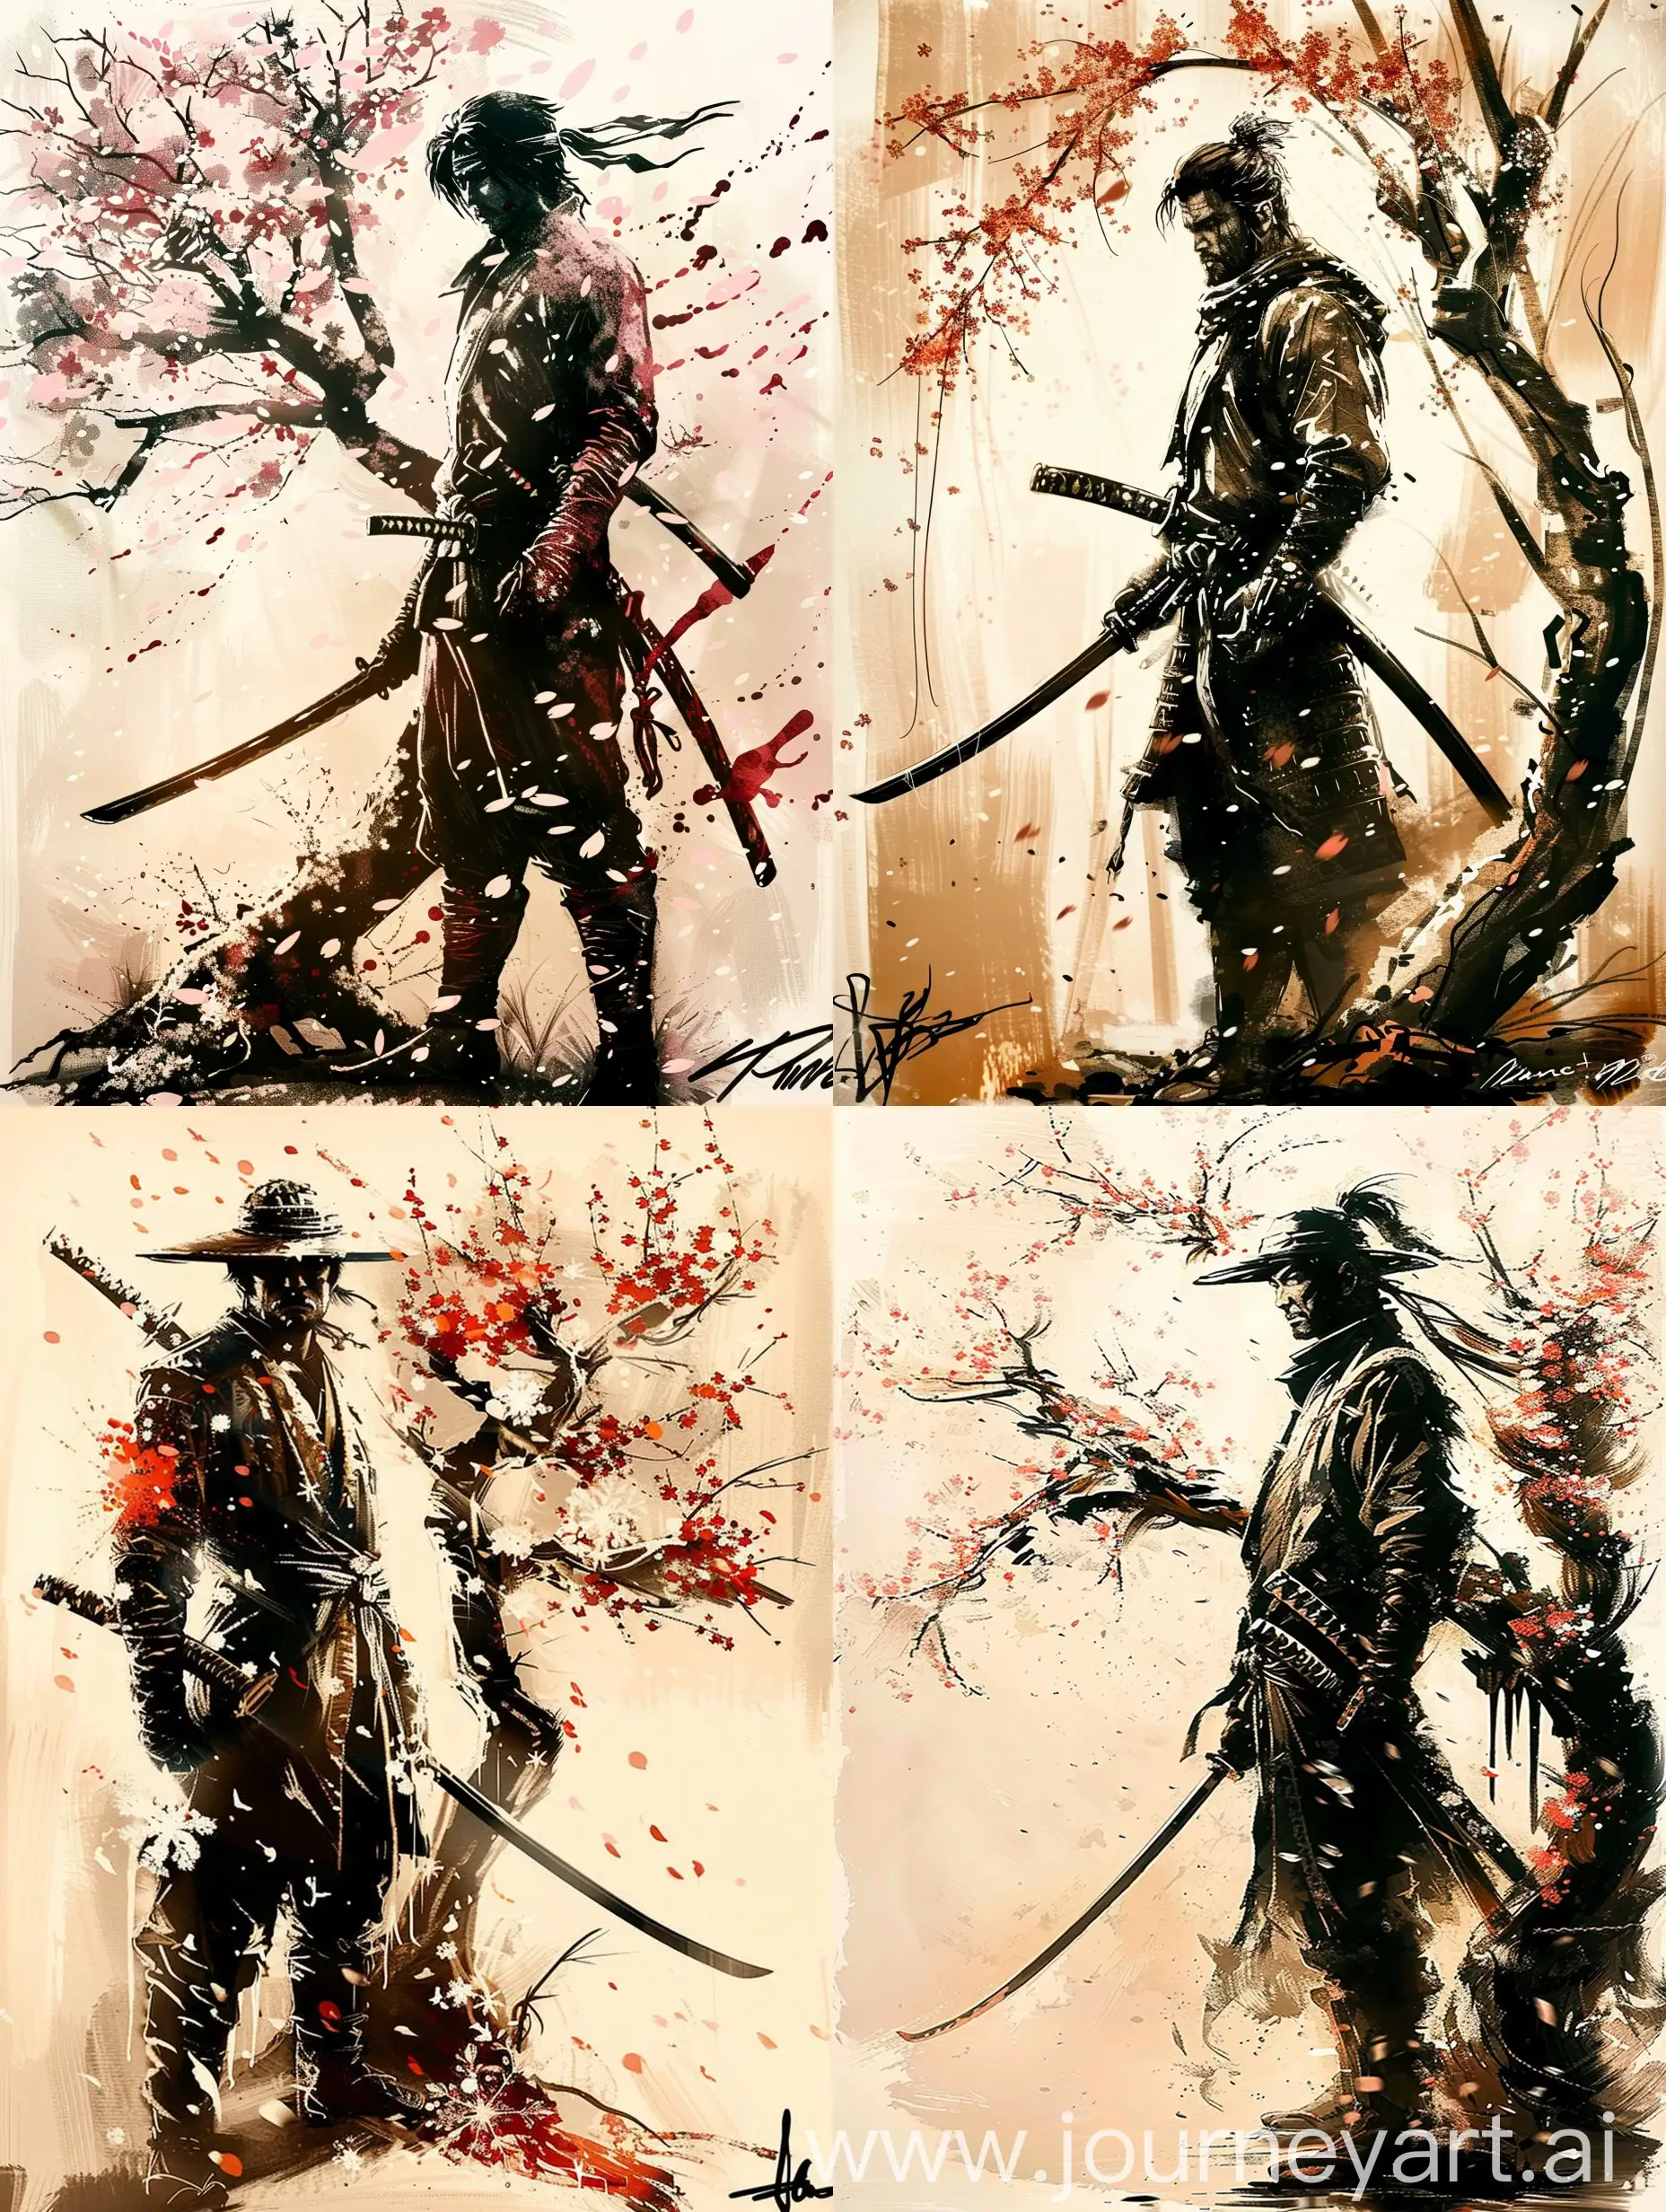 Samurai-Warrior-in-Winter-Combat-Stance-by-Ancient-Cherry-Blossom-Tree